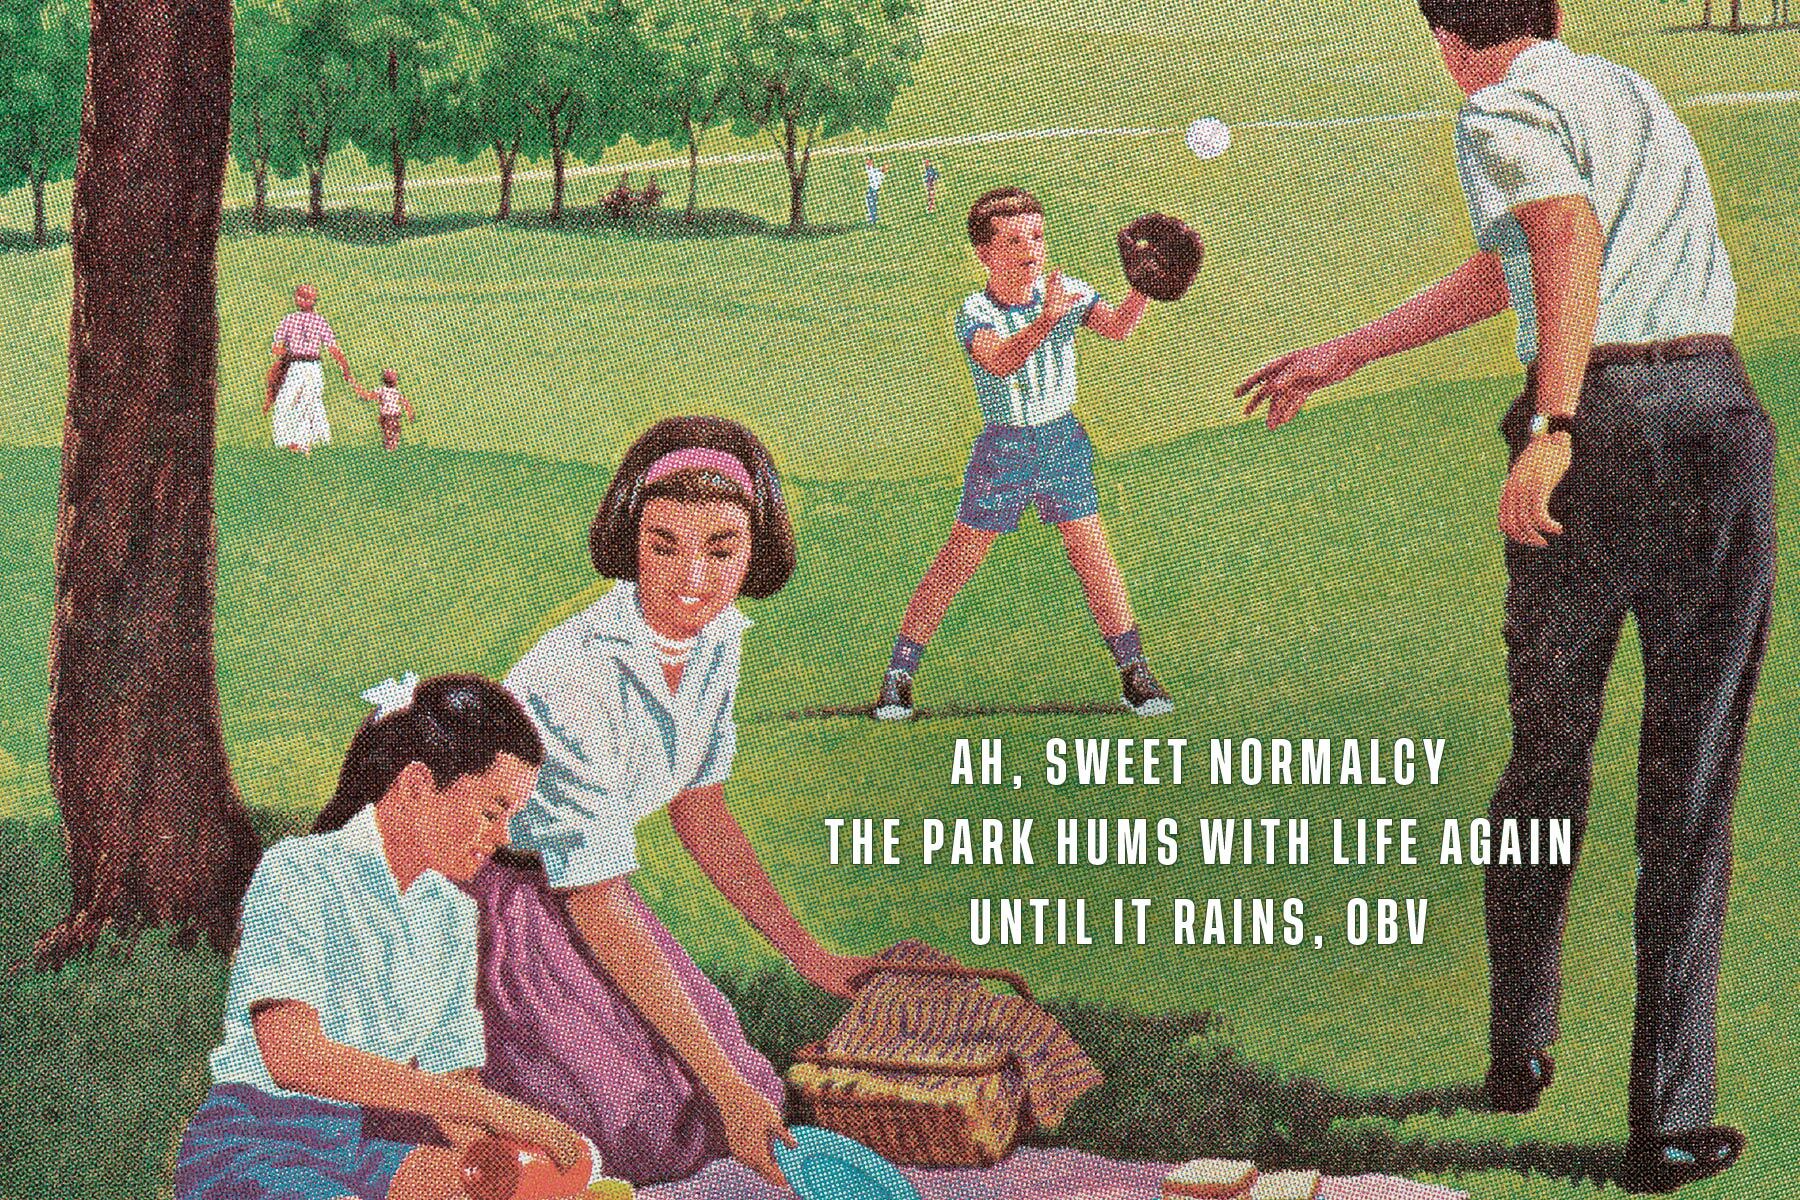 A 1950s-style illustration of a day in the park with a funny haiku laid over it, which is included in this article.